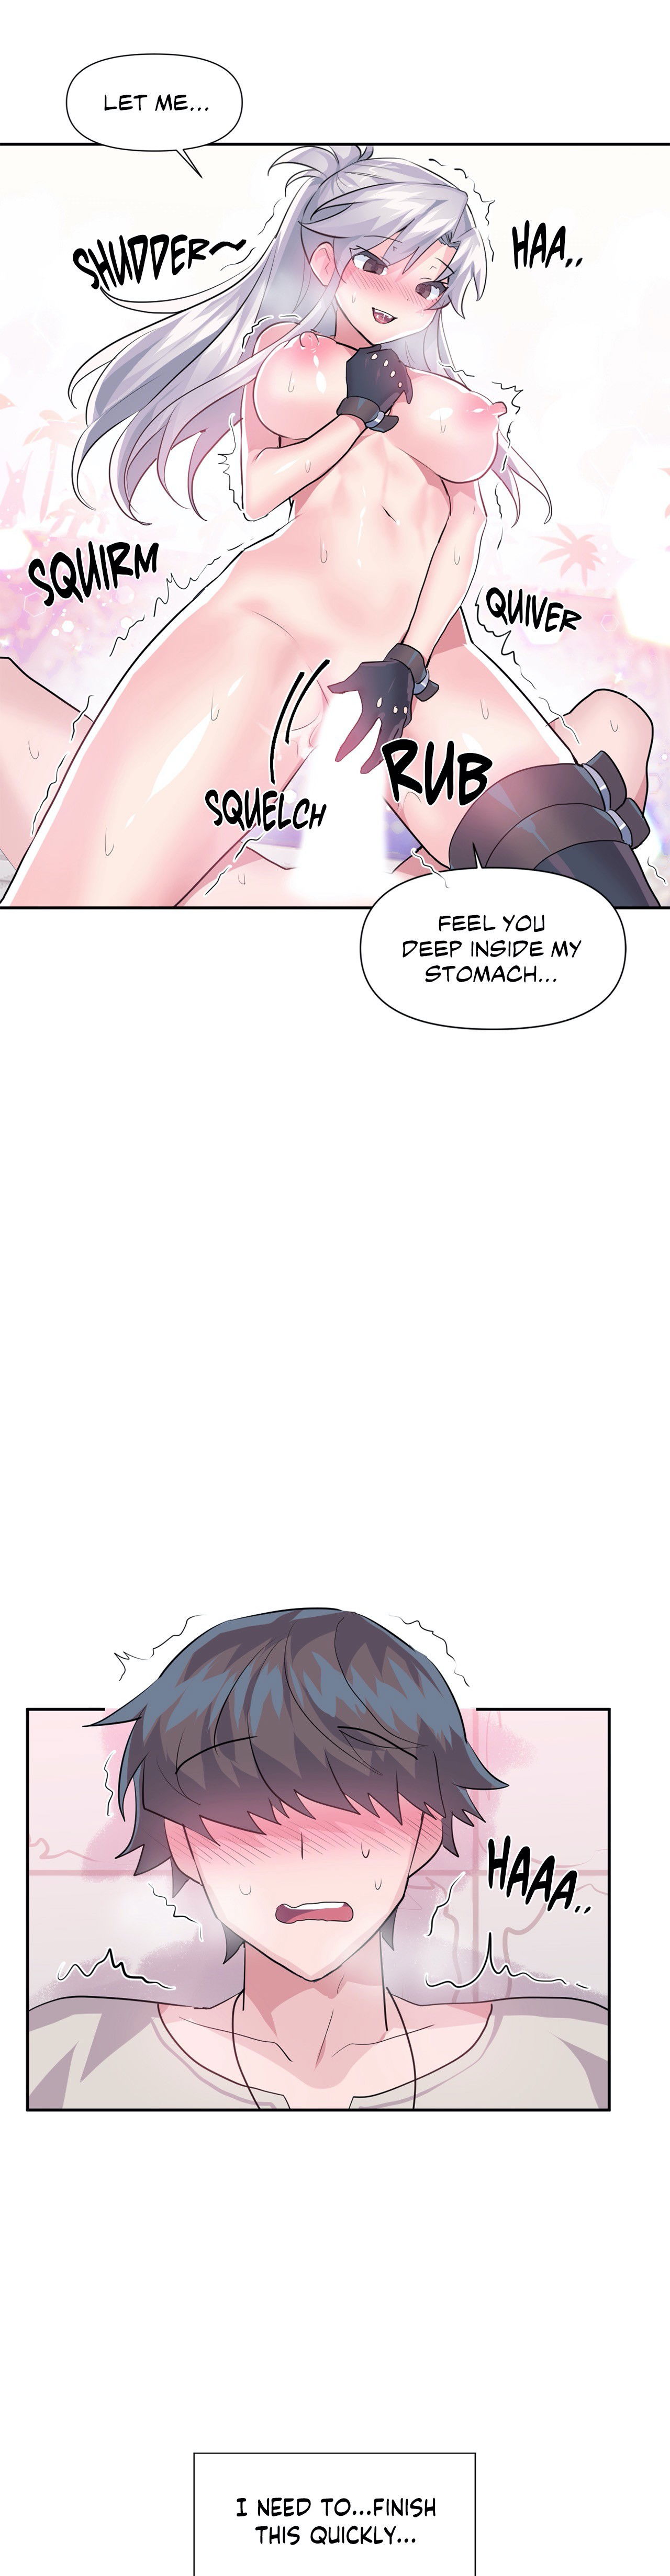 log-in-to-lust-a-land-chap-31-18